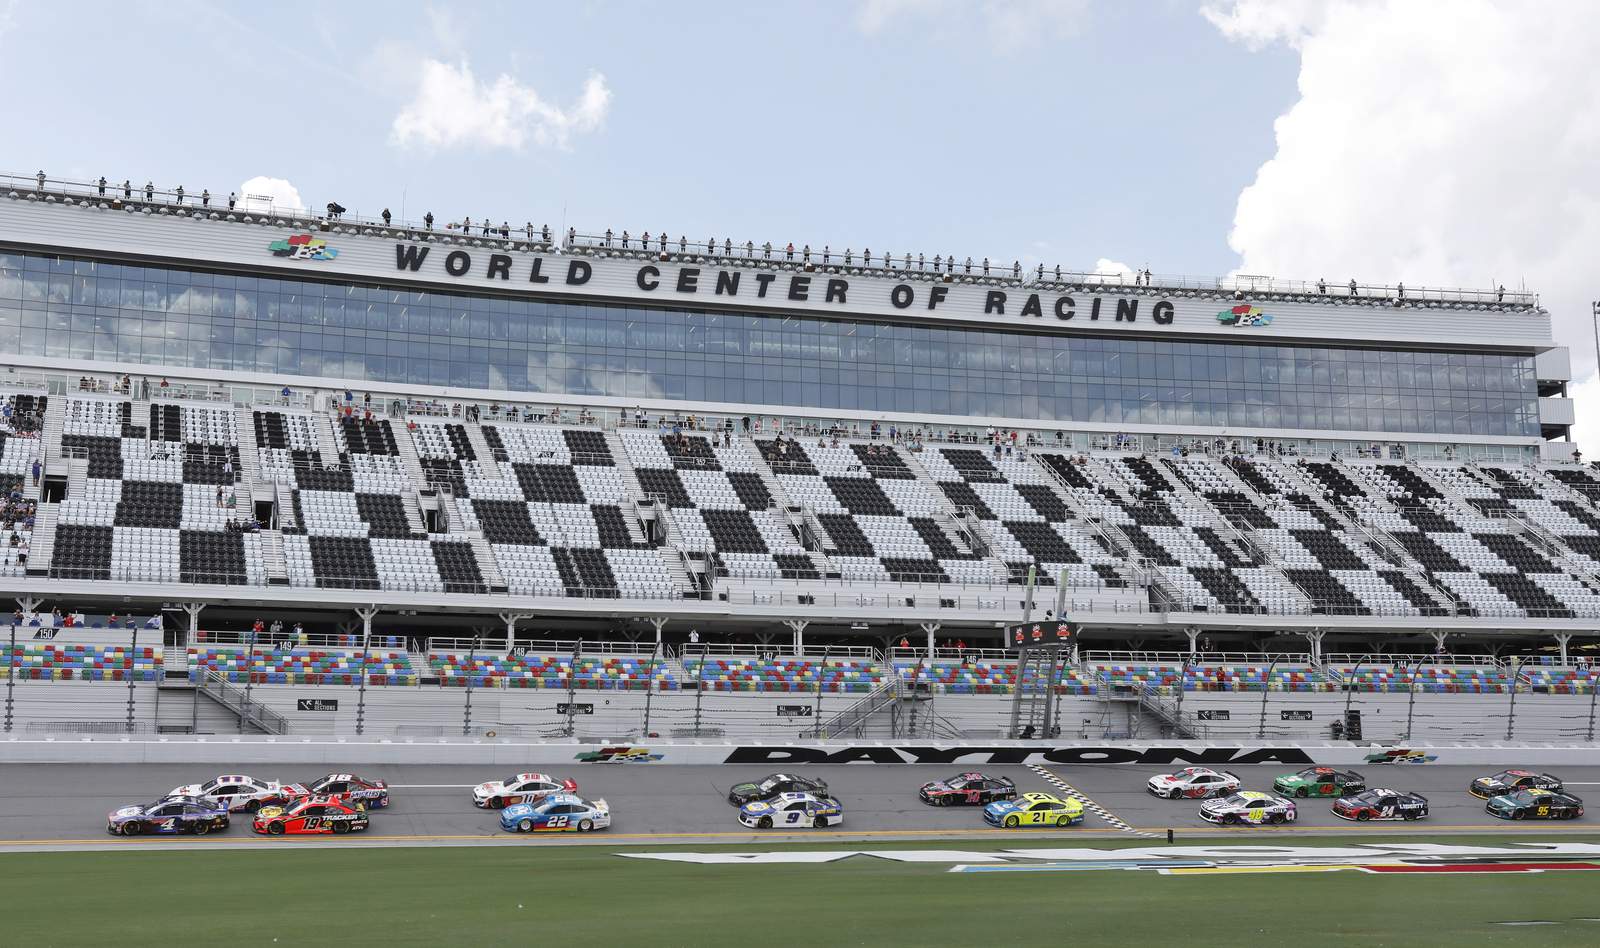 Higher stakes at Daytona mean 'crazy things will happen'